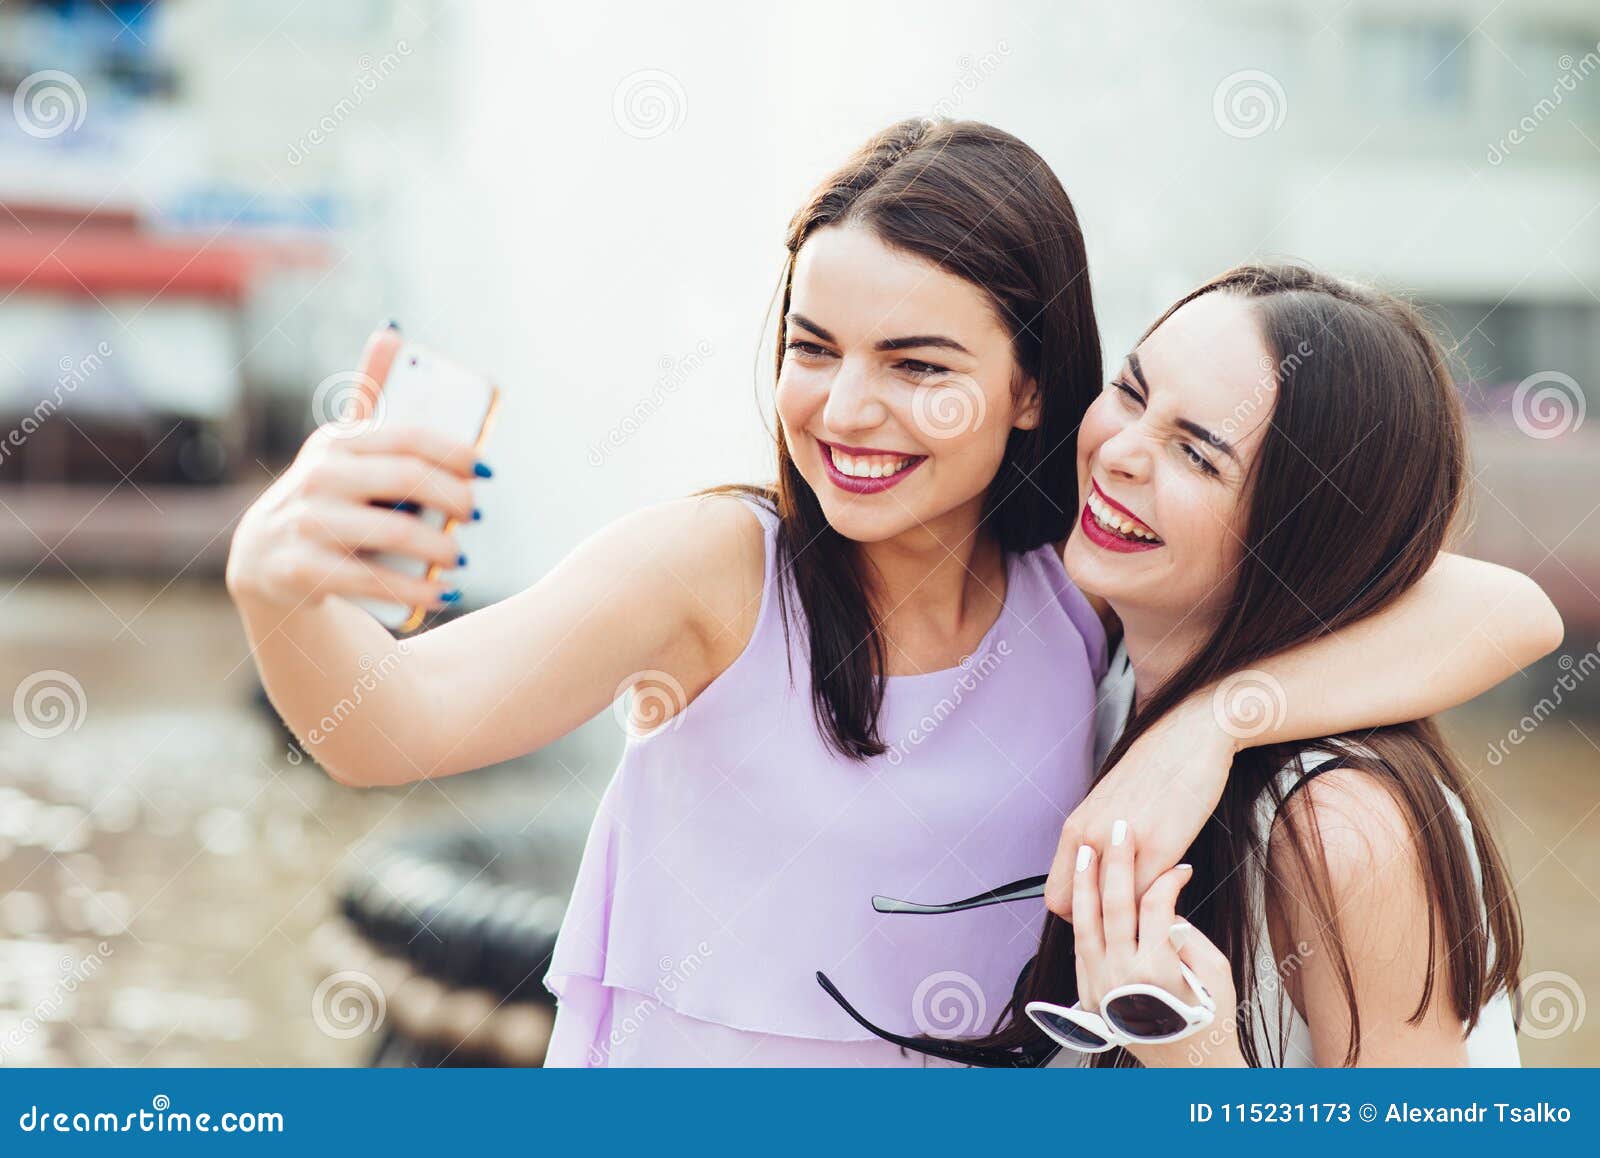 Two Beautiful Sisters Do Selfie on the Street Stock Image - Image of ...